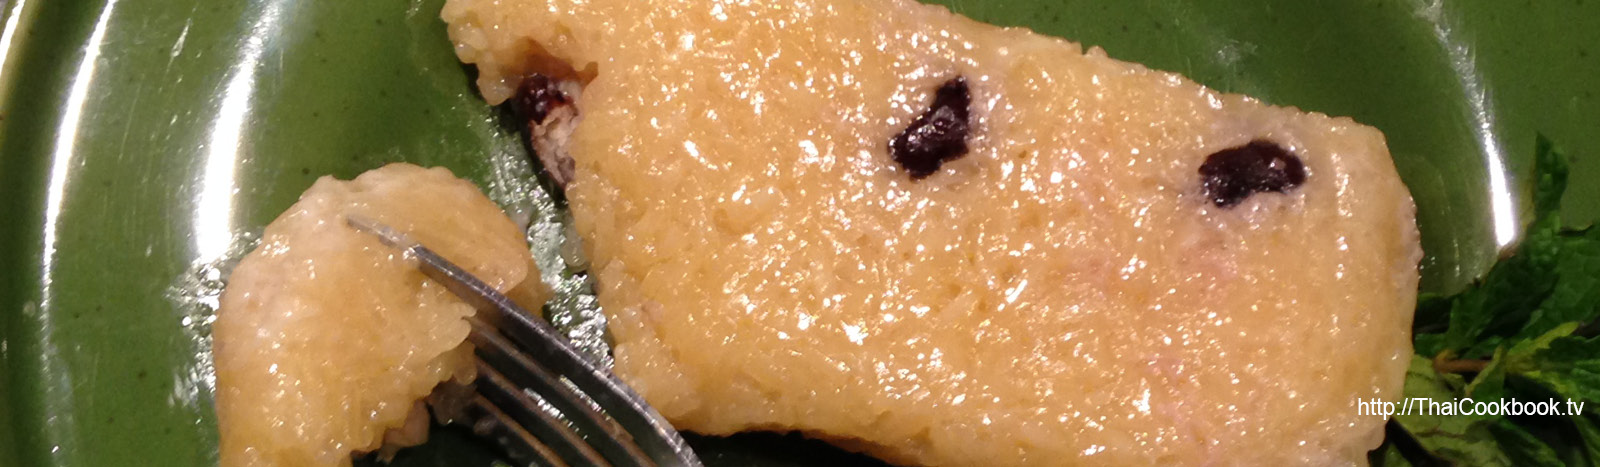 Authentic Thai recipe for Sweet Sticky Rice with Banana Filling